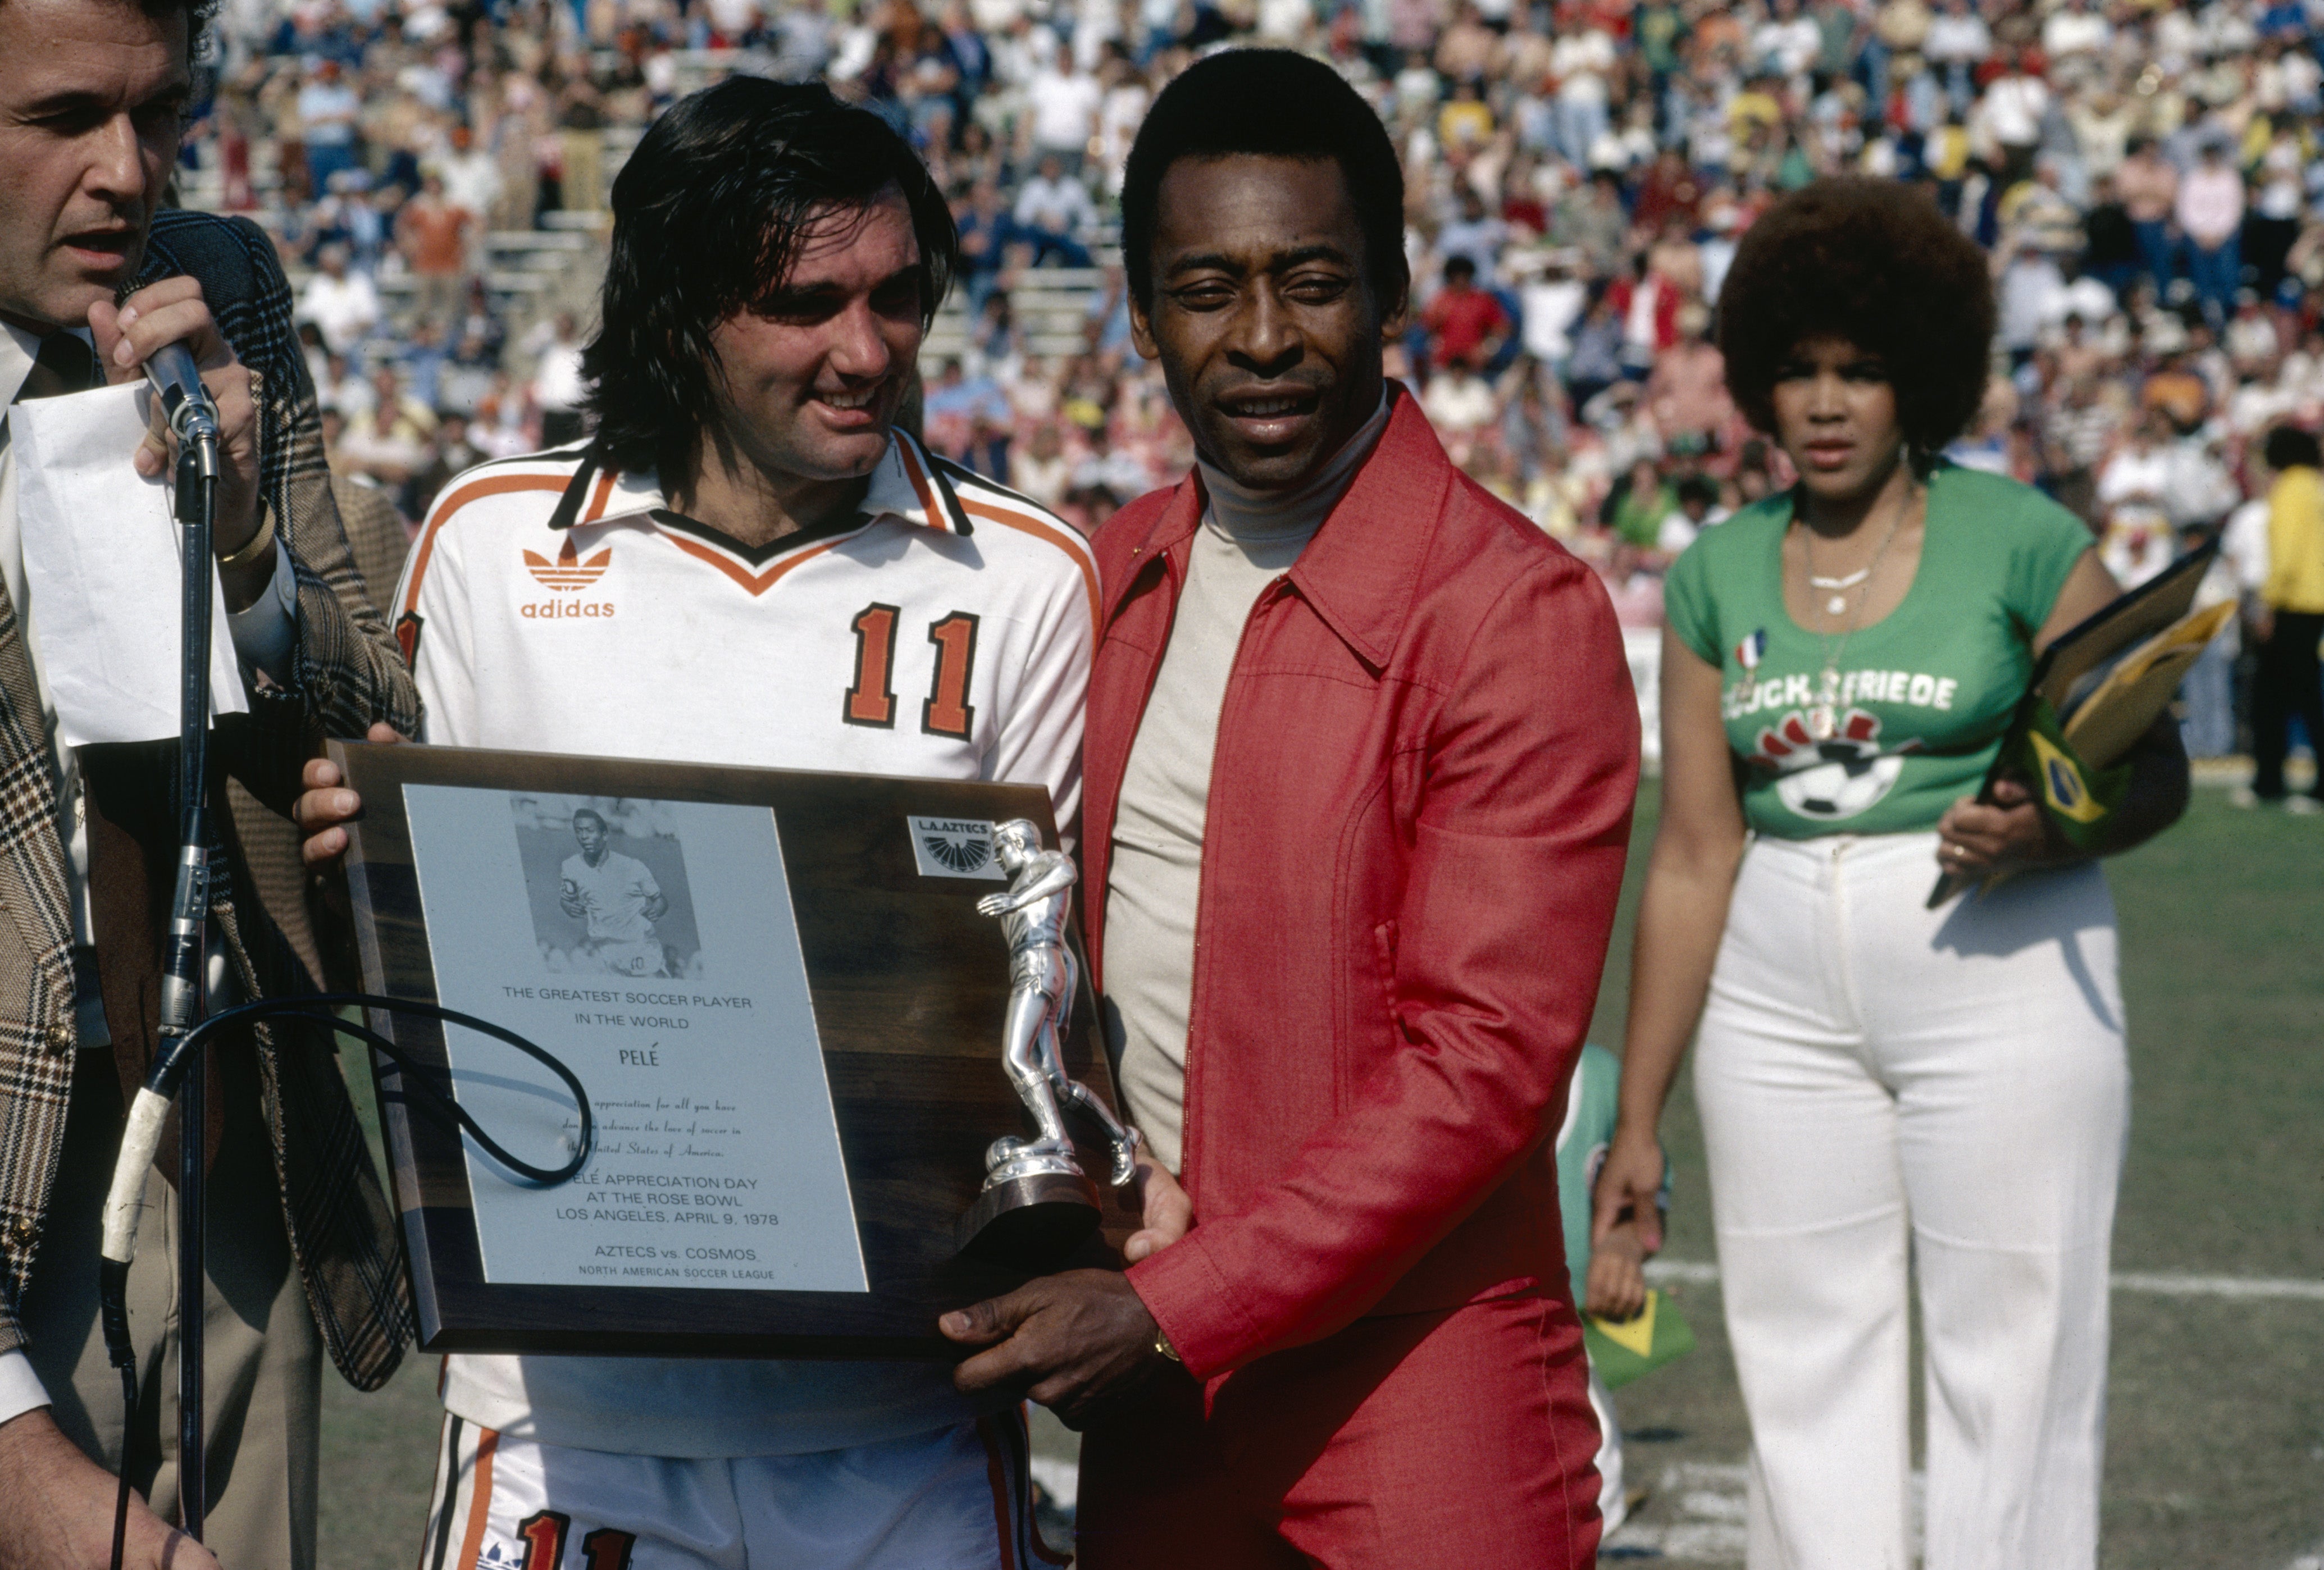 Legends of the game: George Best presents Pele with a plaque at the Rose Bowl stadium in California, 1978